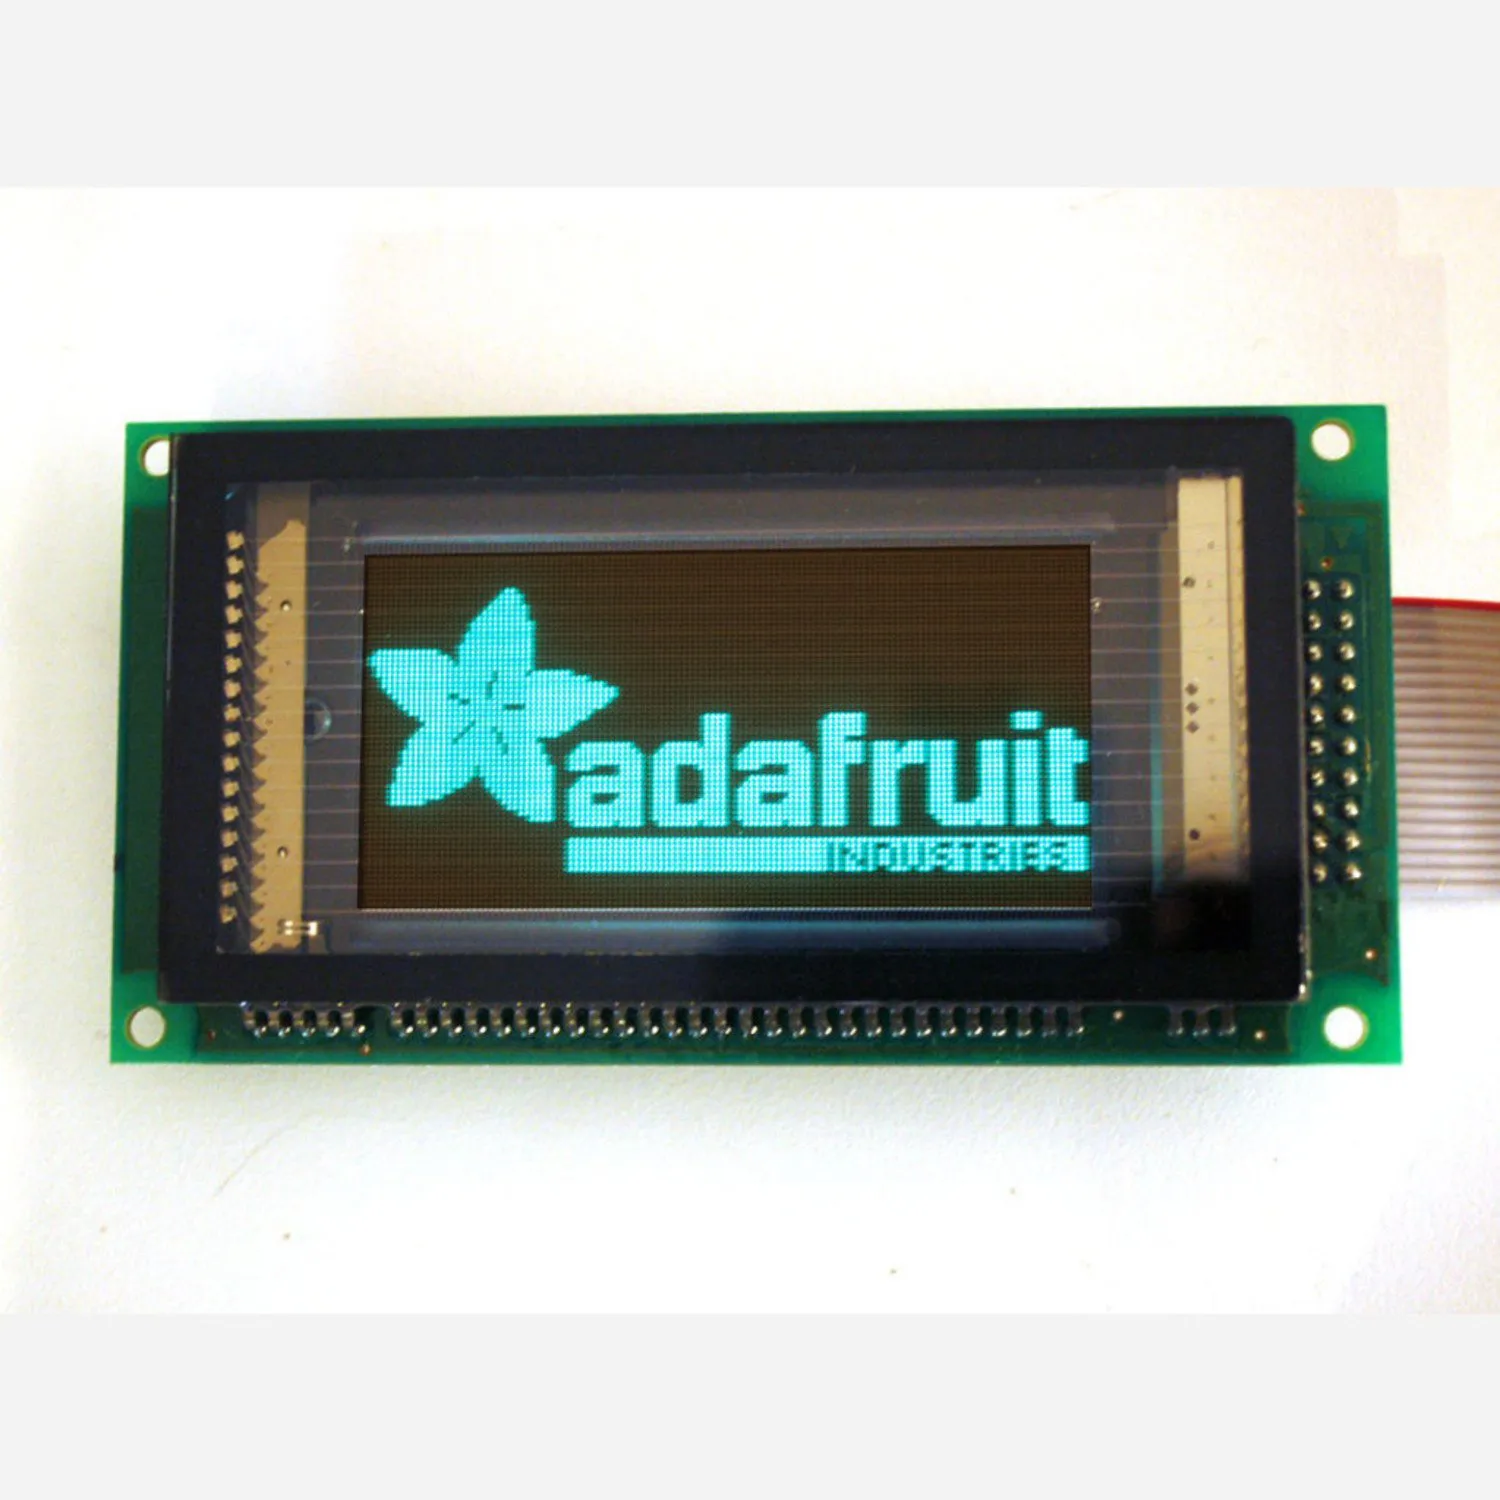 Photo of 128x64 Graphic VFD (Vacuum Fluorescent Display) - SPI interface